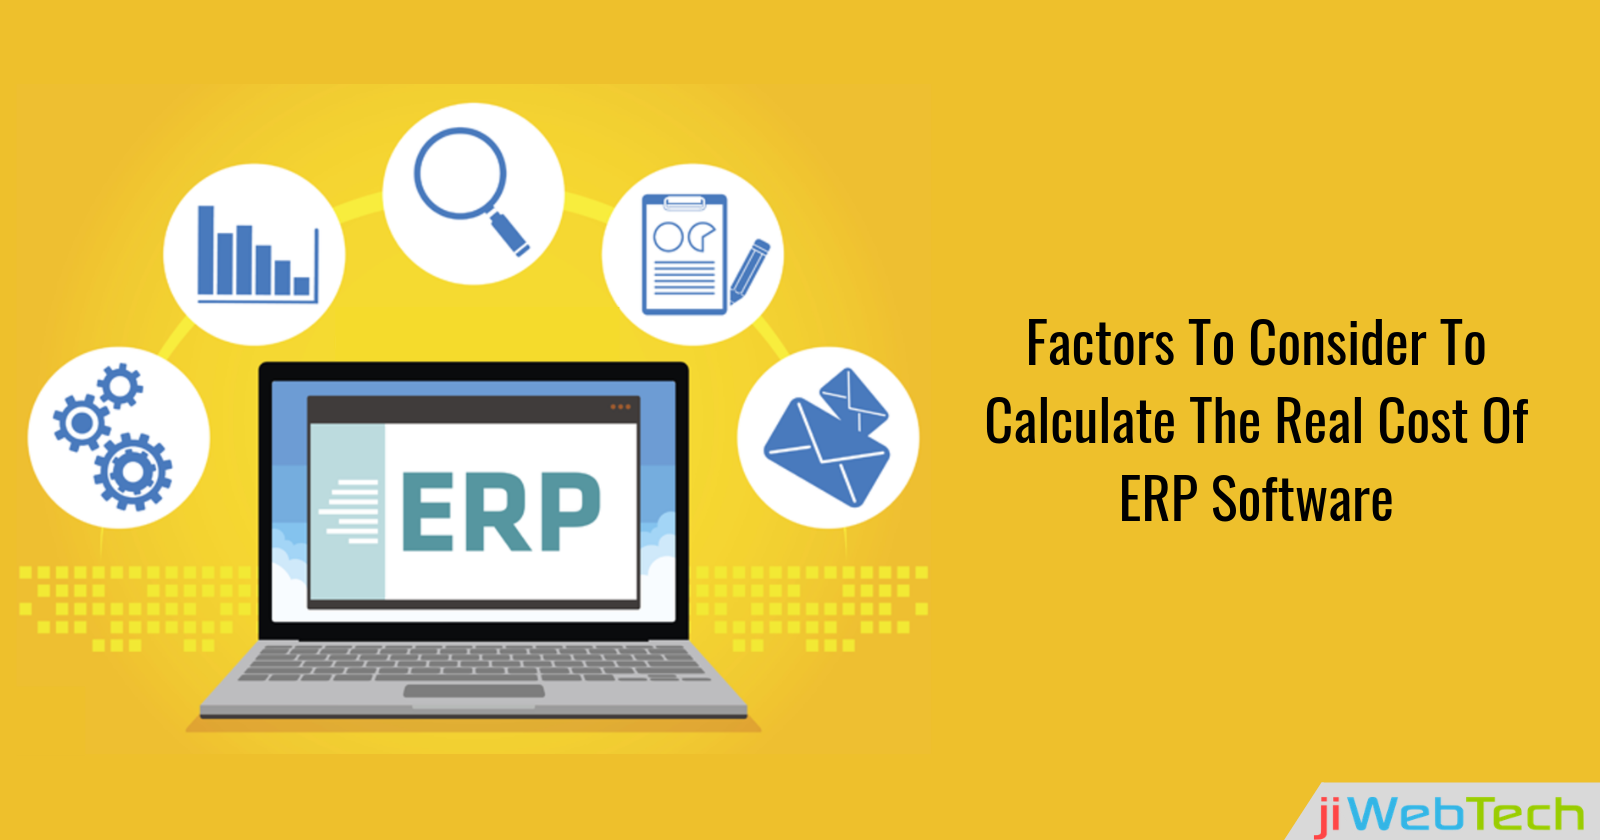 How To Calculate The Real Cost Of ERP